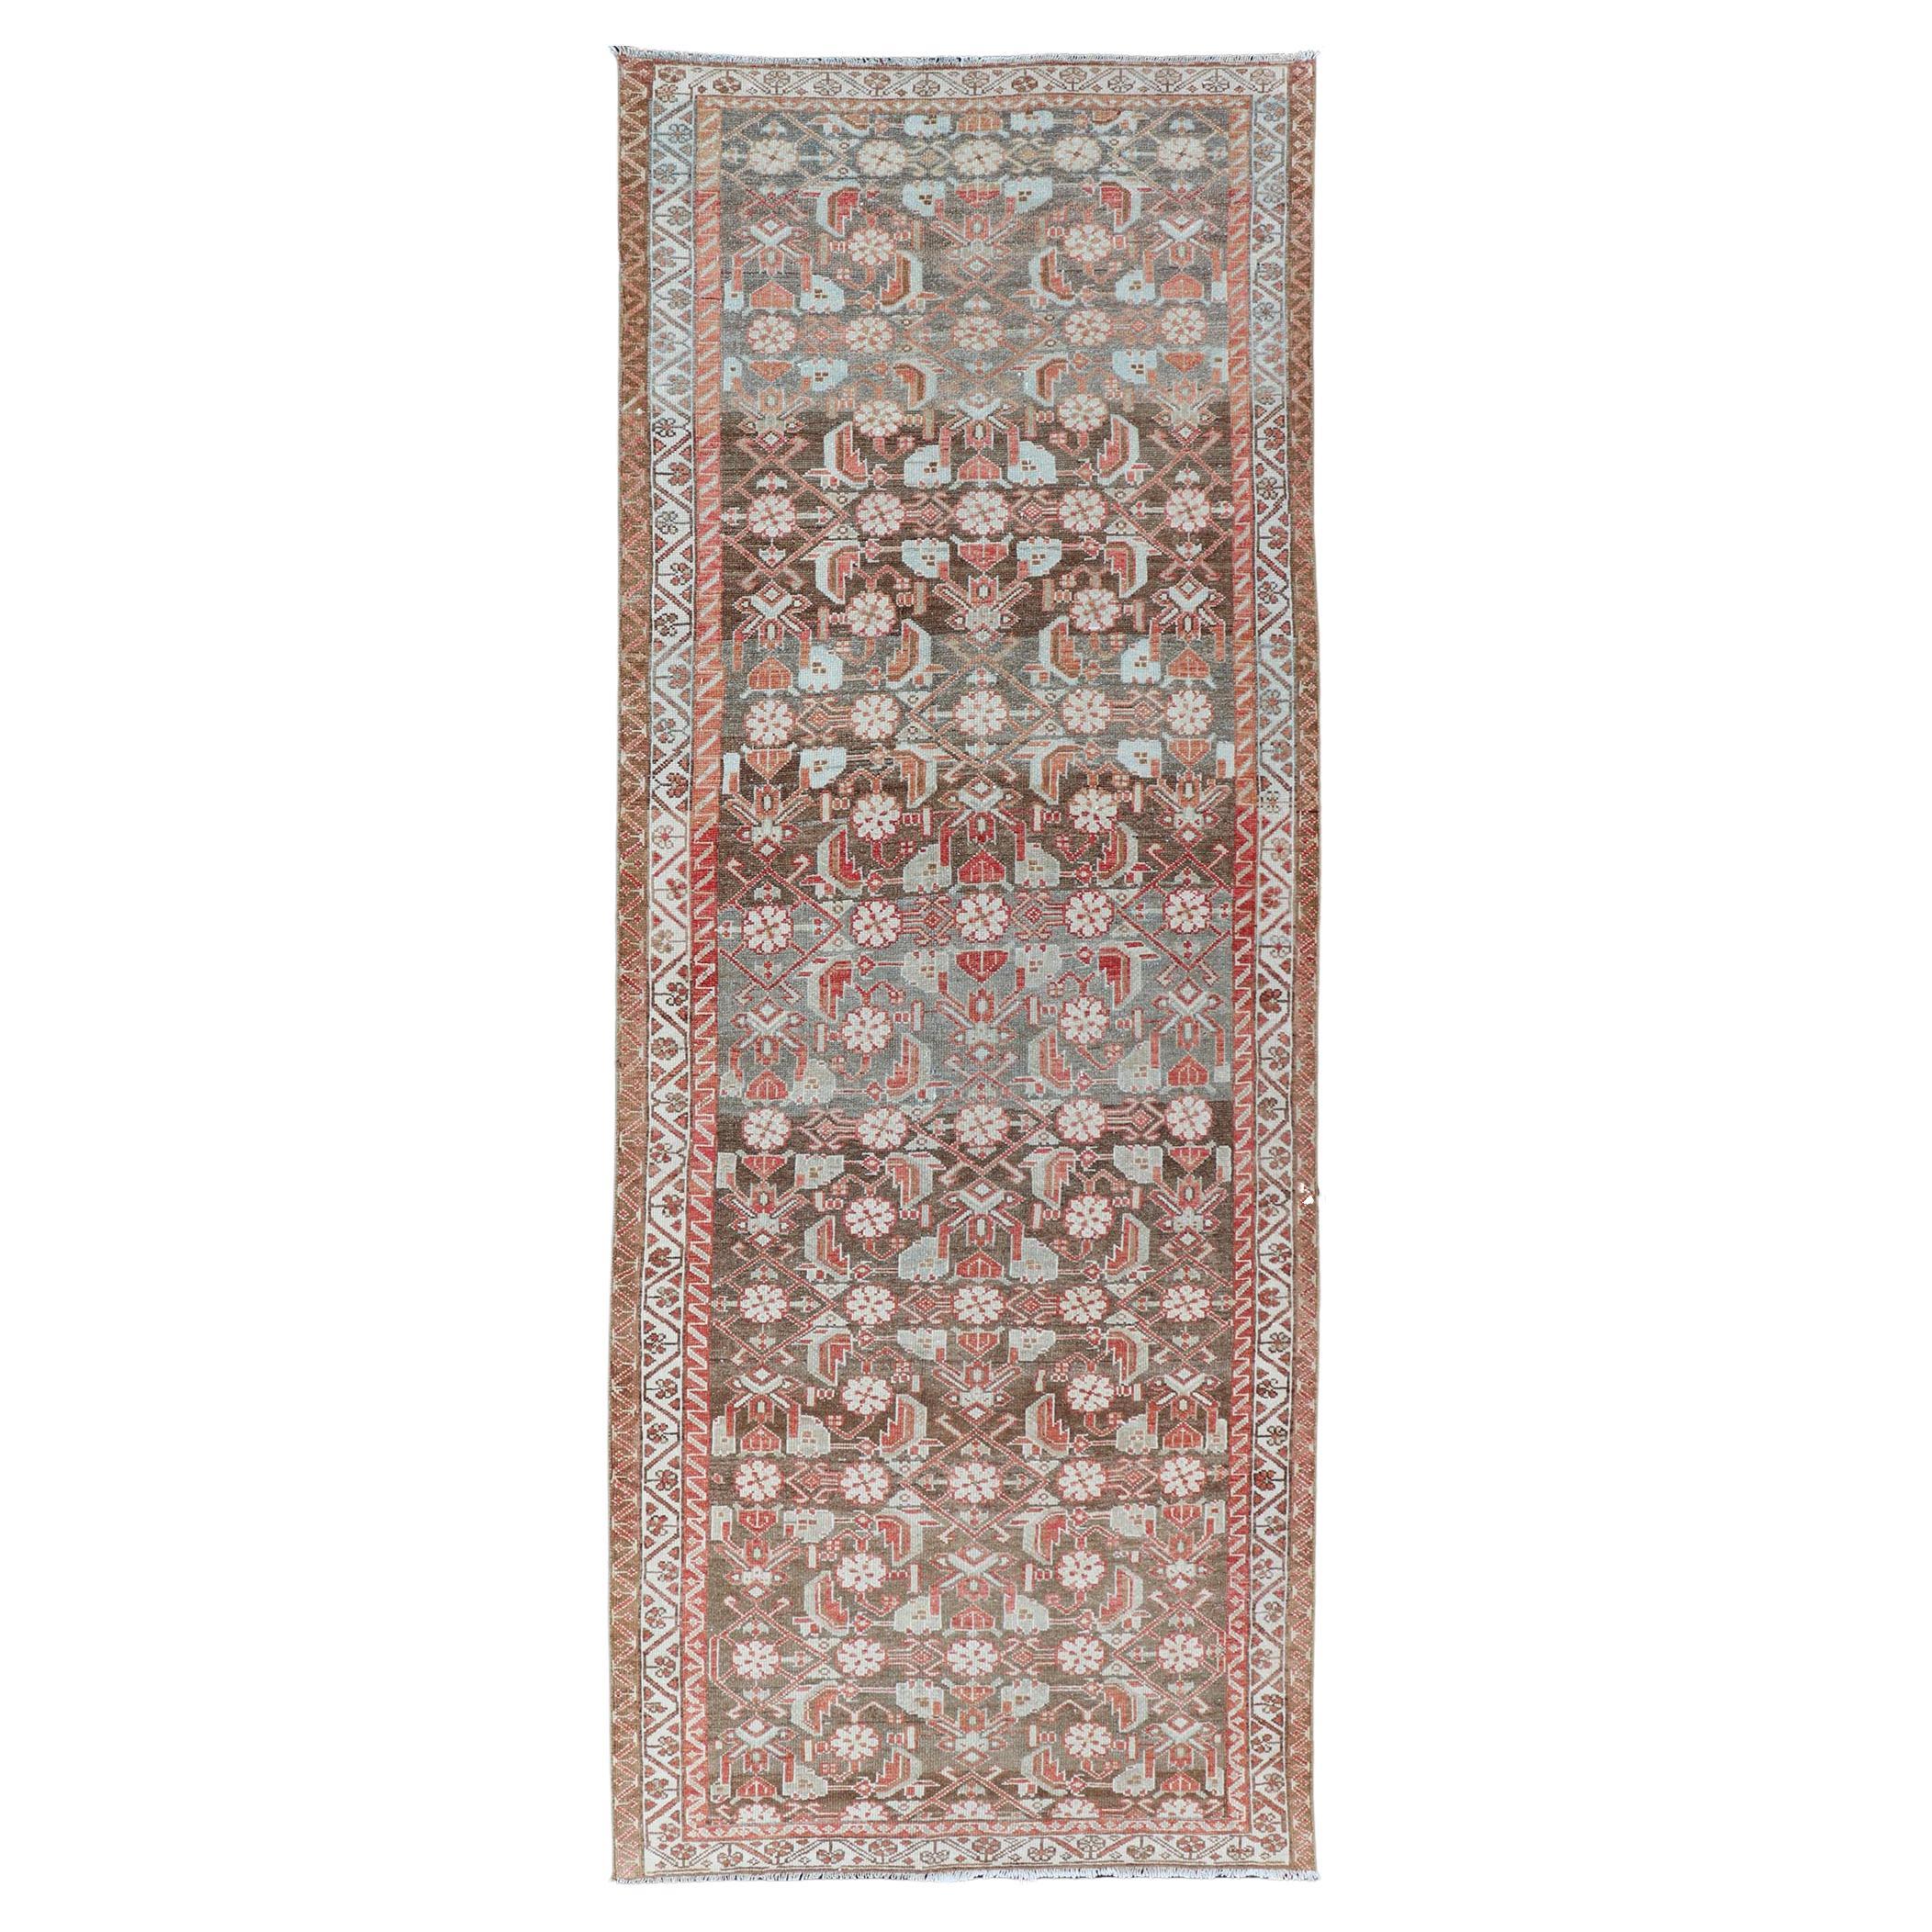 Antique Persian Malayer with Sub-Geometric Floral Design in Reds & Earthy Tones For Sale